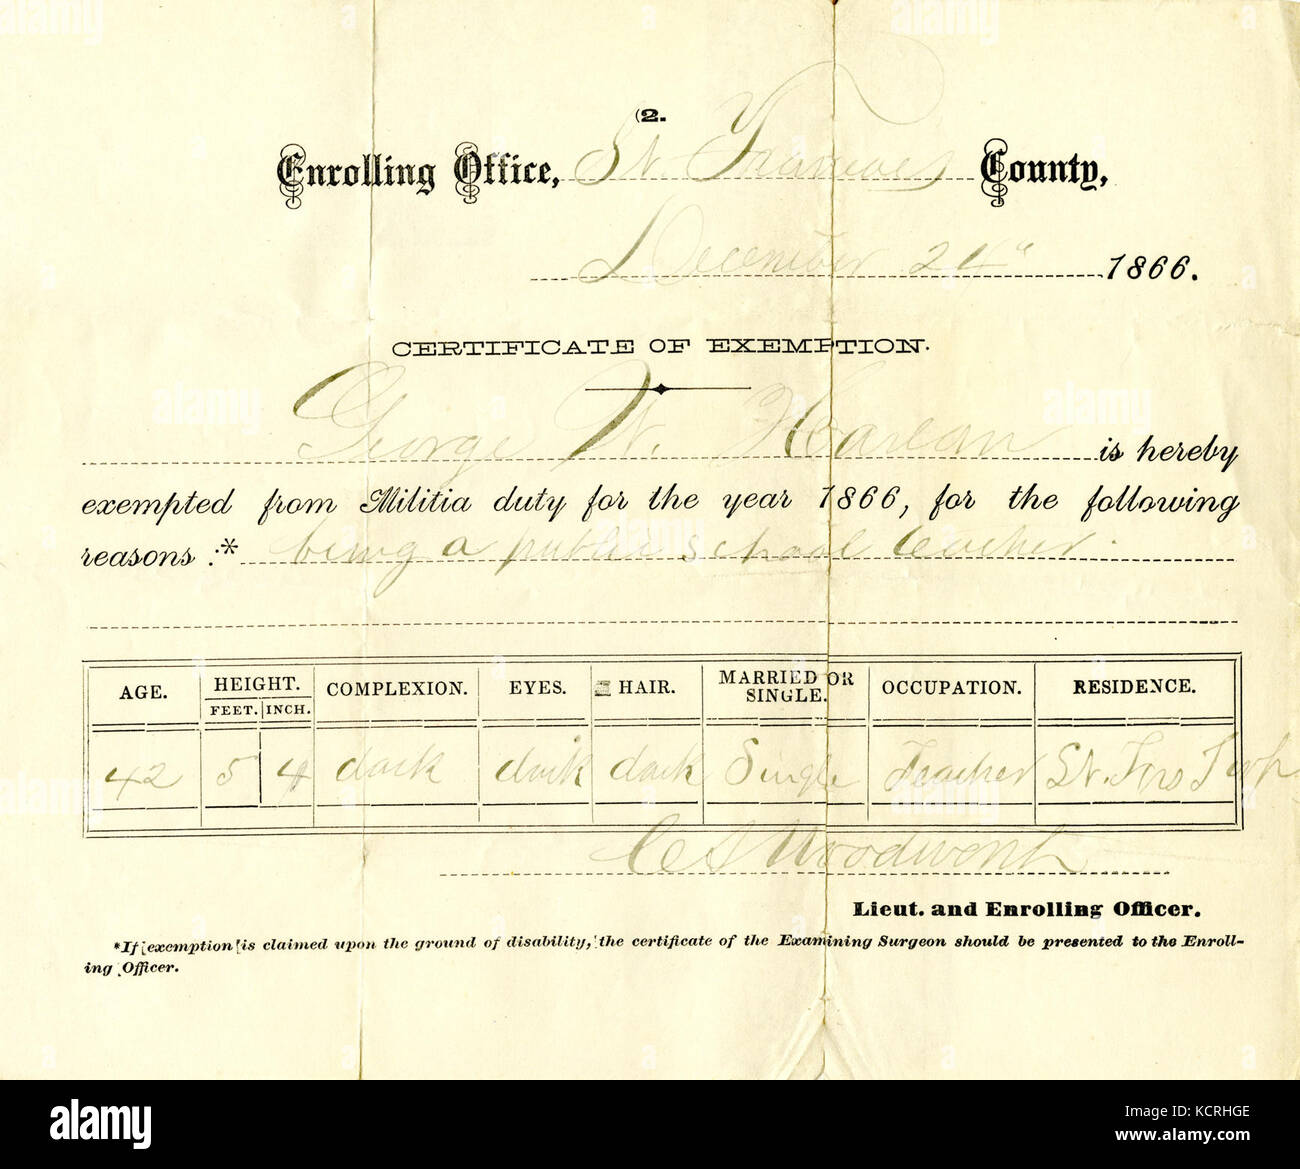 Certificate of exemption of George W. Harlan, Enrolling Office, St. Francois County, December 24, 1866 Stock Photo